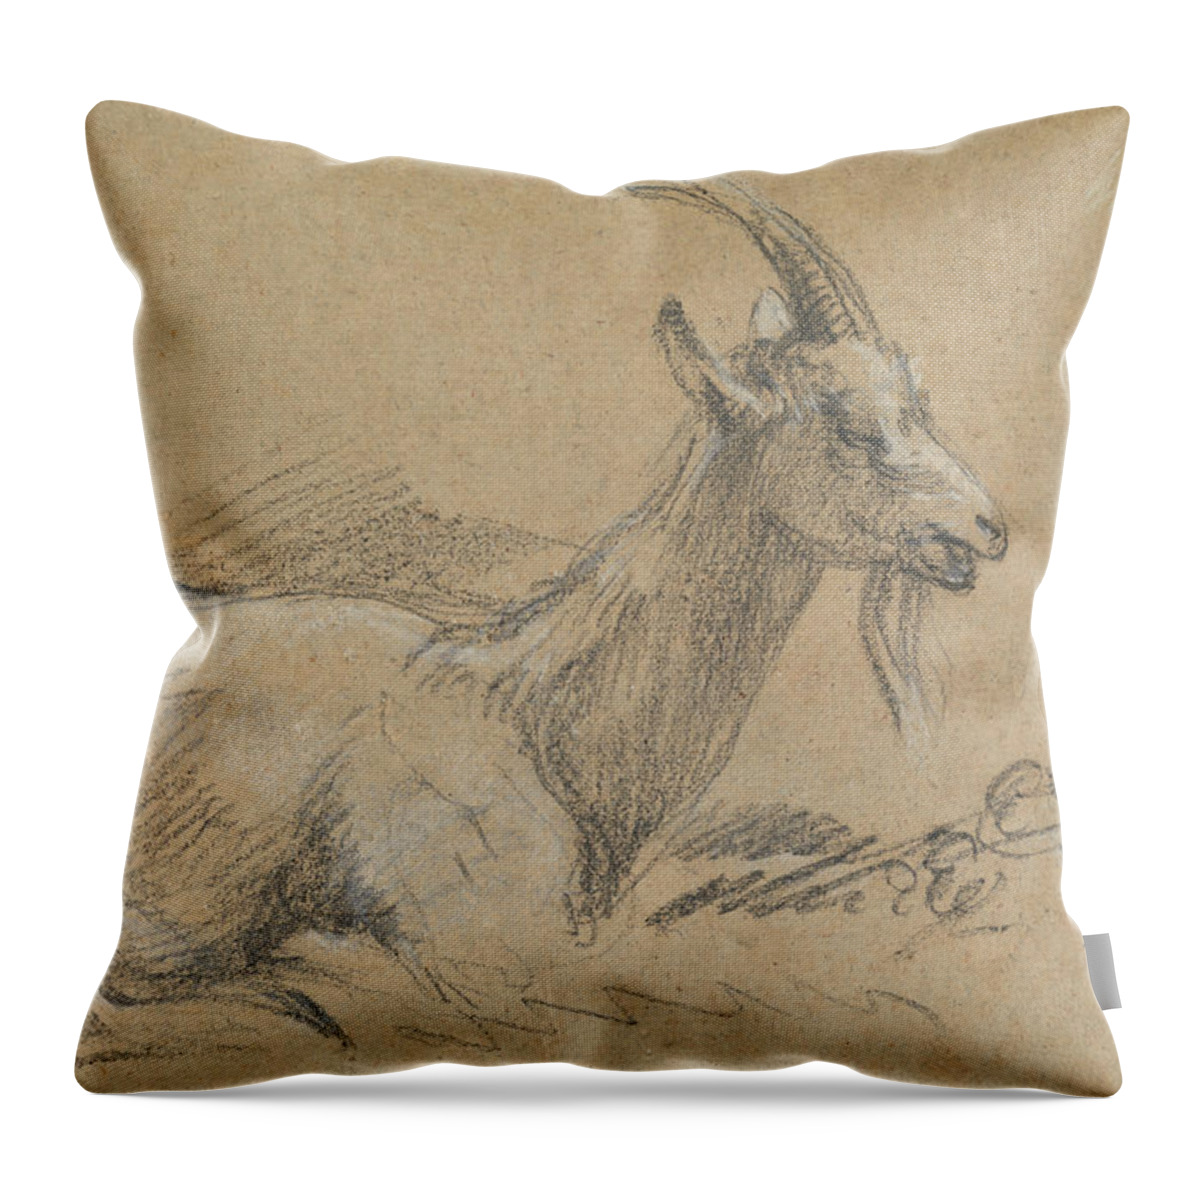 18th Century Art Throw Pillow featuring the drawing Study of a Goat by Thomas Gainsborough